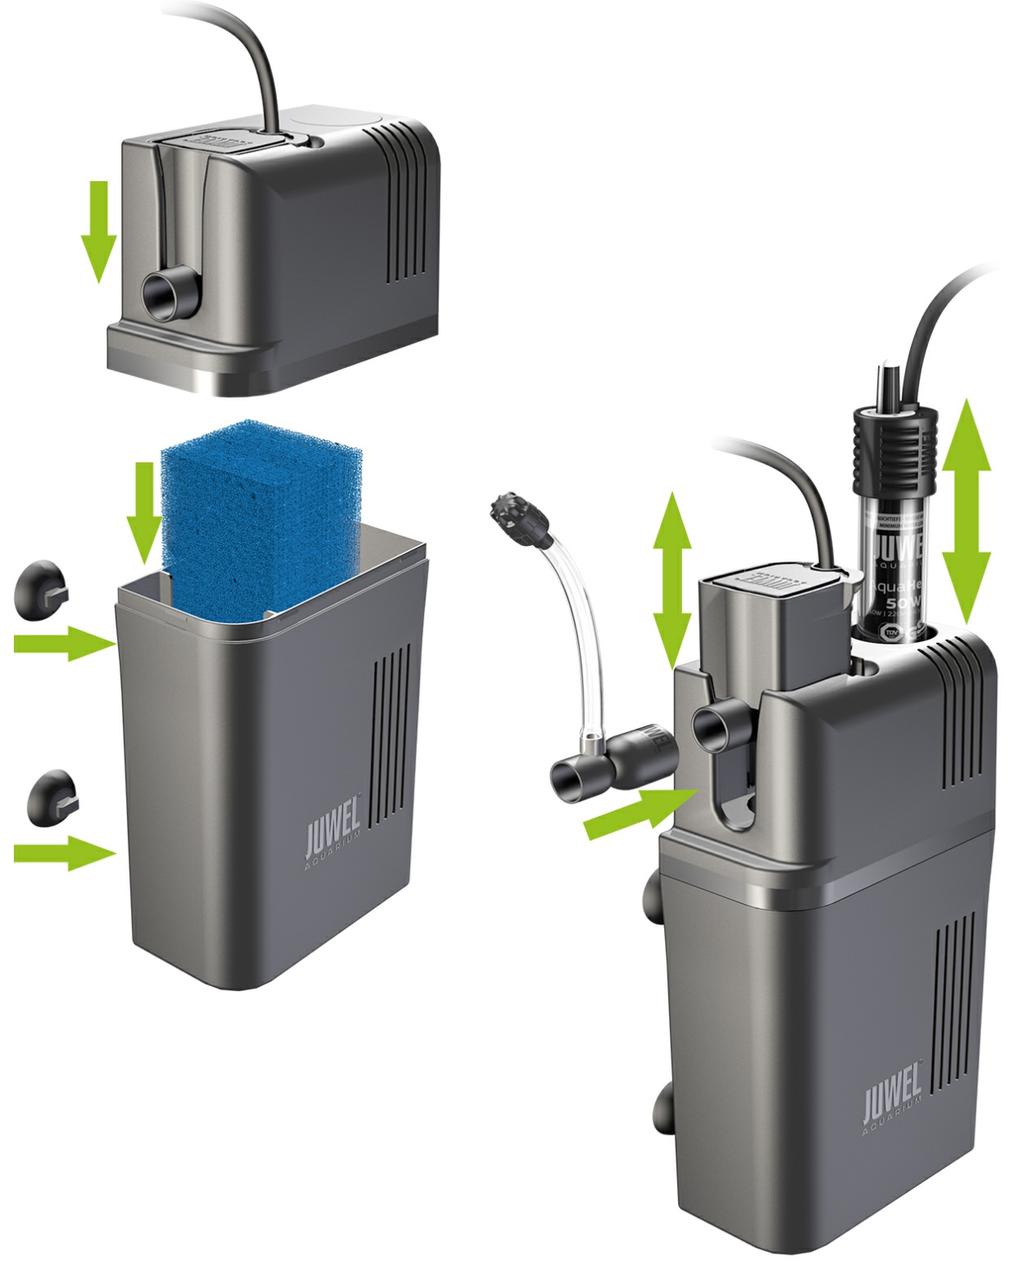 system. In addition to this, the JUWEL Bioflow ONE filter system offers the option of integrating the heater (optionally available).